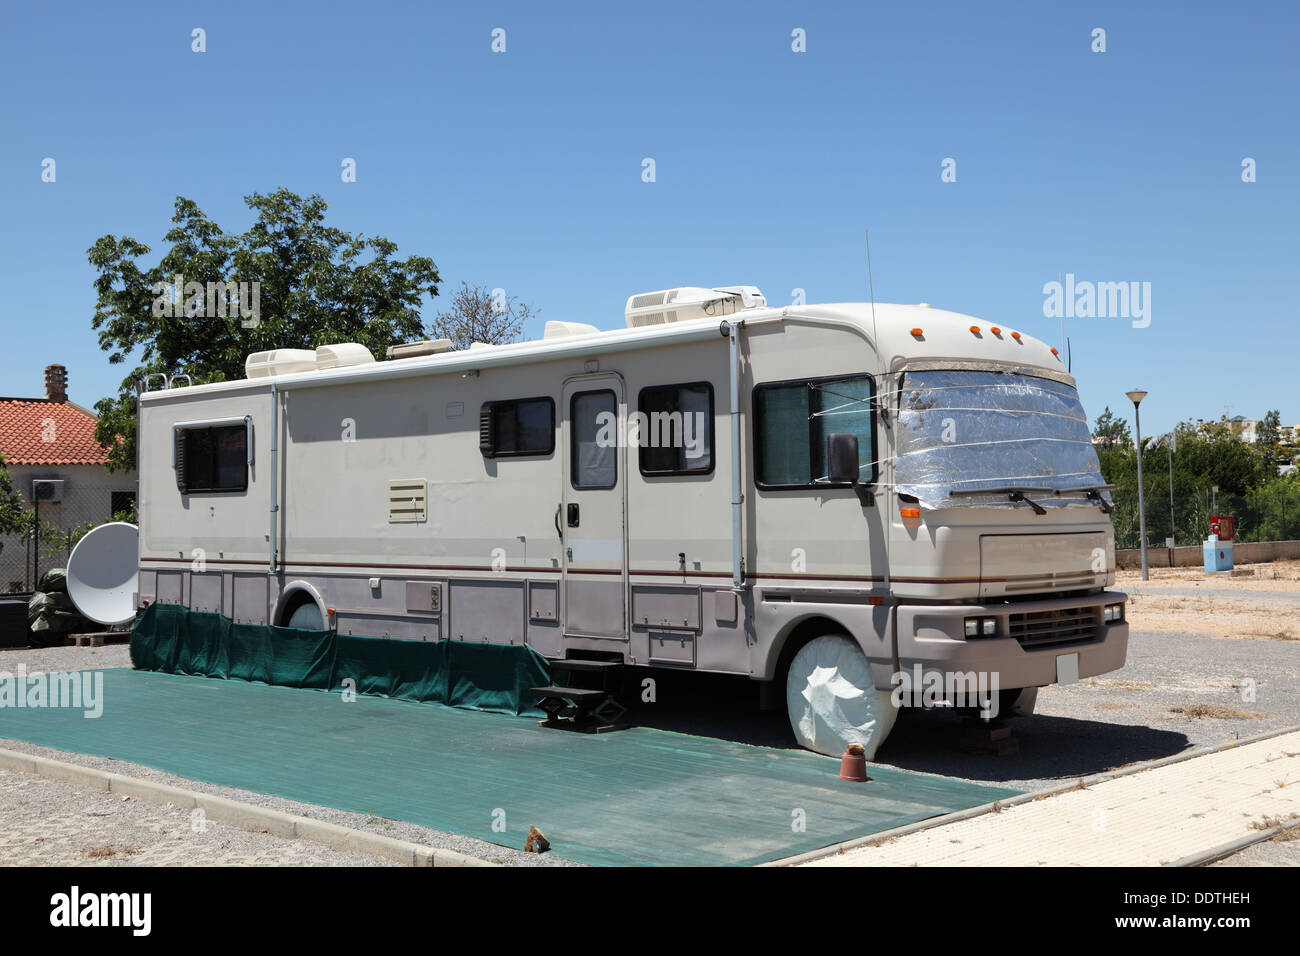 Large RV on a camping site Stock Photo